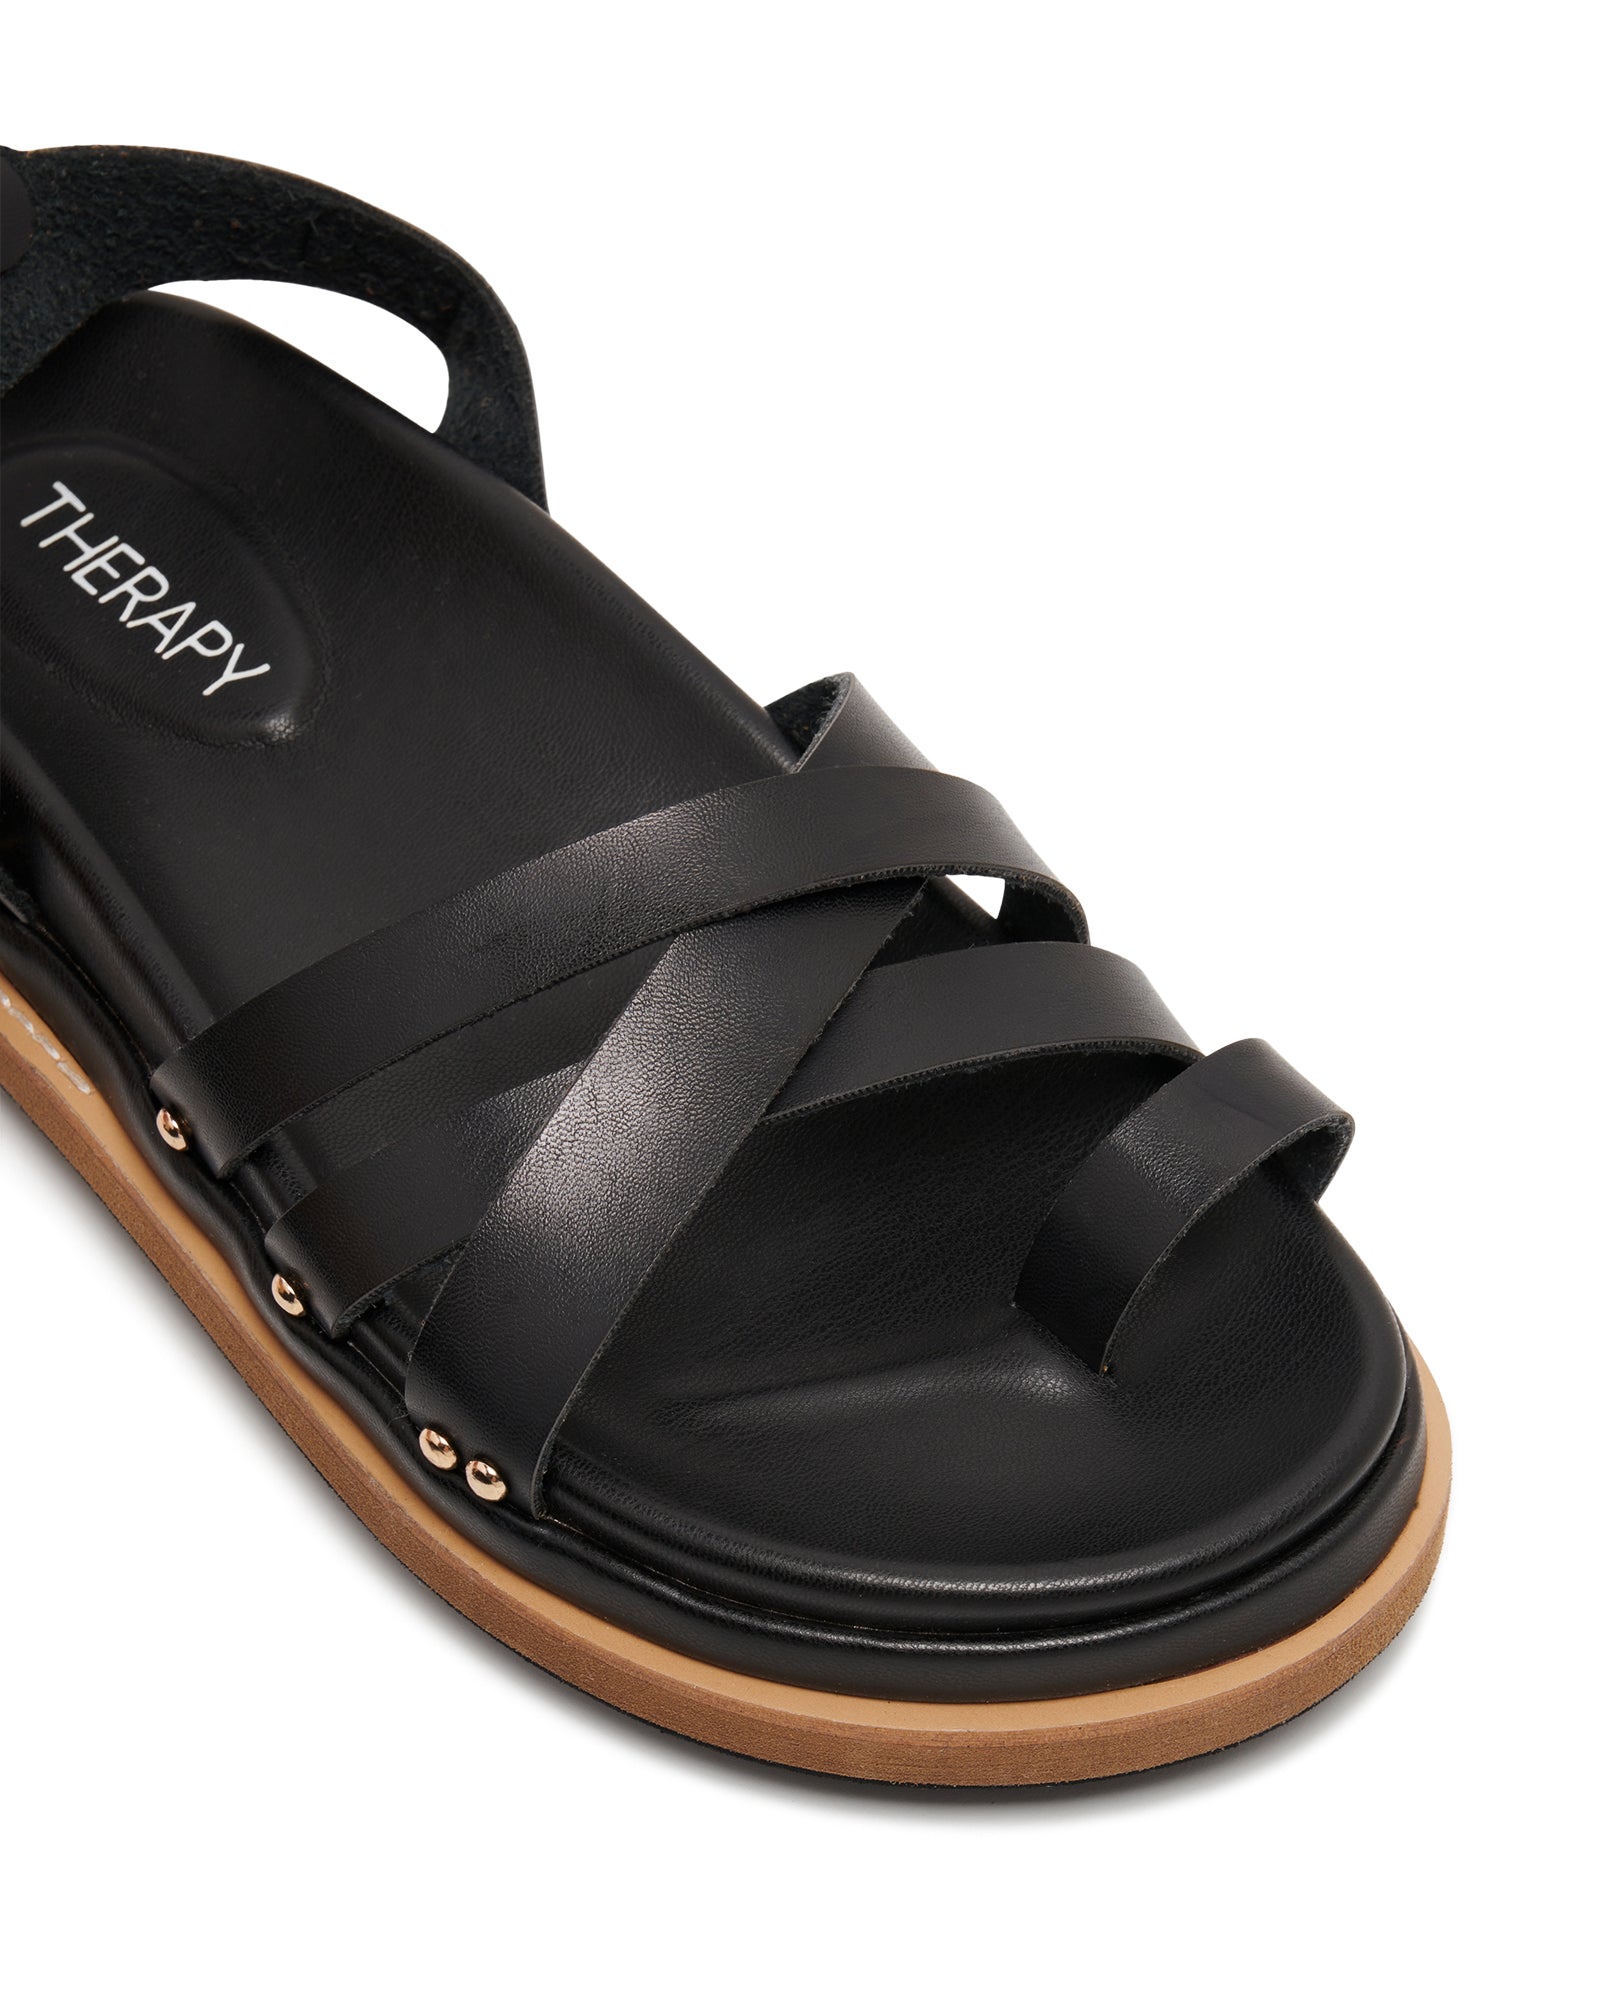 Therapy Shoes Coco Black | Women's Sandals | Flatform | Chunky | Footbed